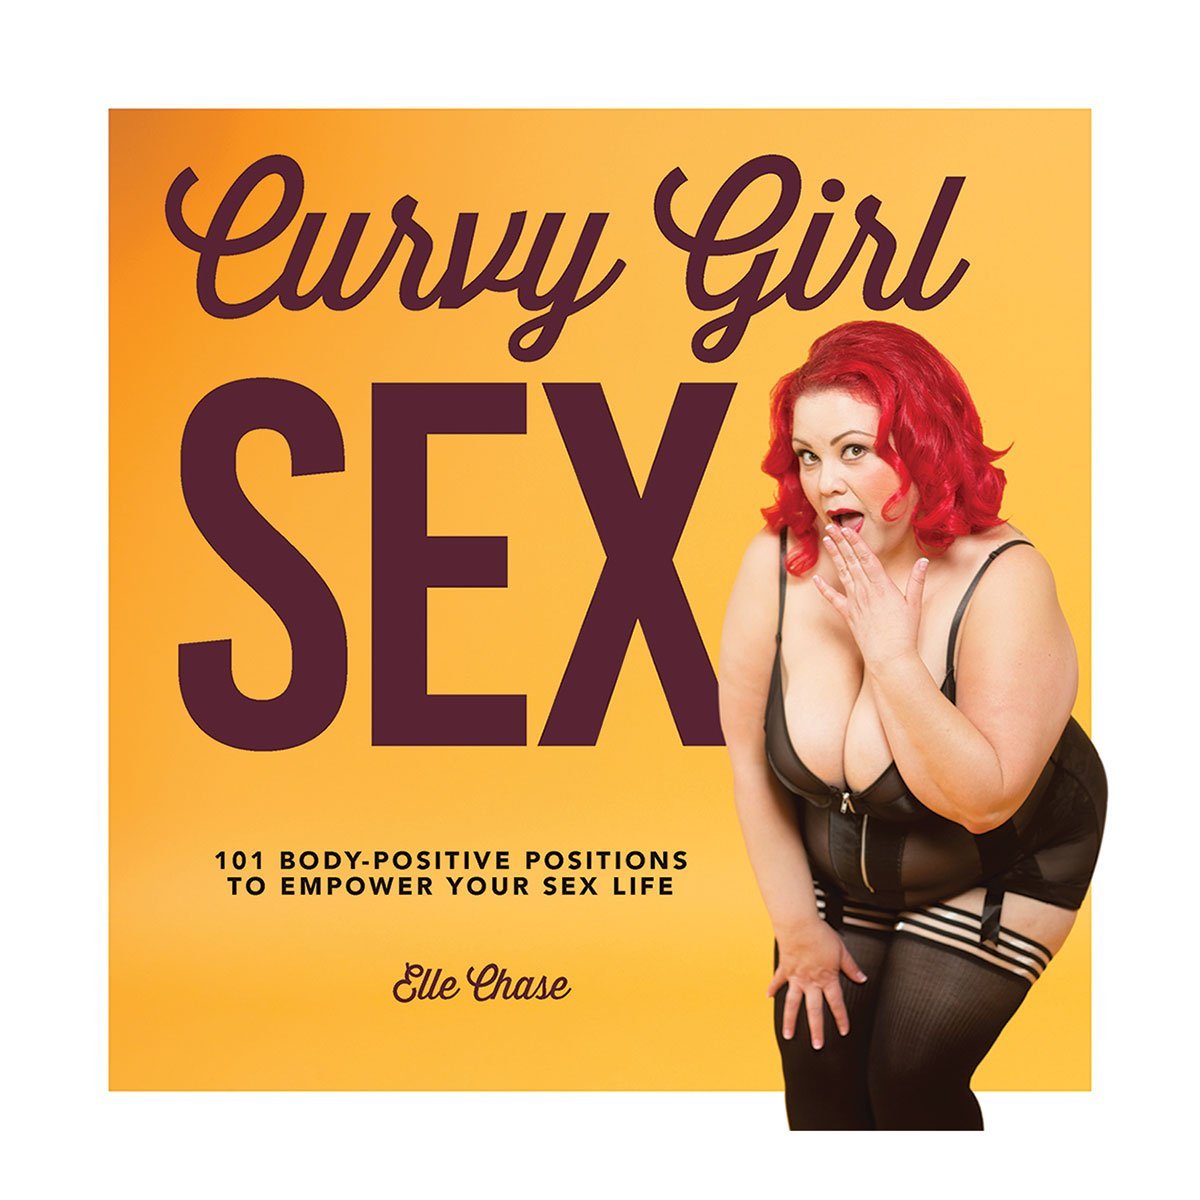 Curvy Girl Sex - 101 Body-Positive Positions to Empower Your Sex Life - Kink Store